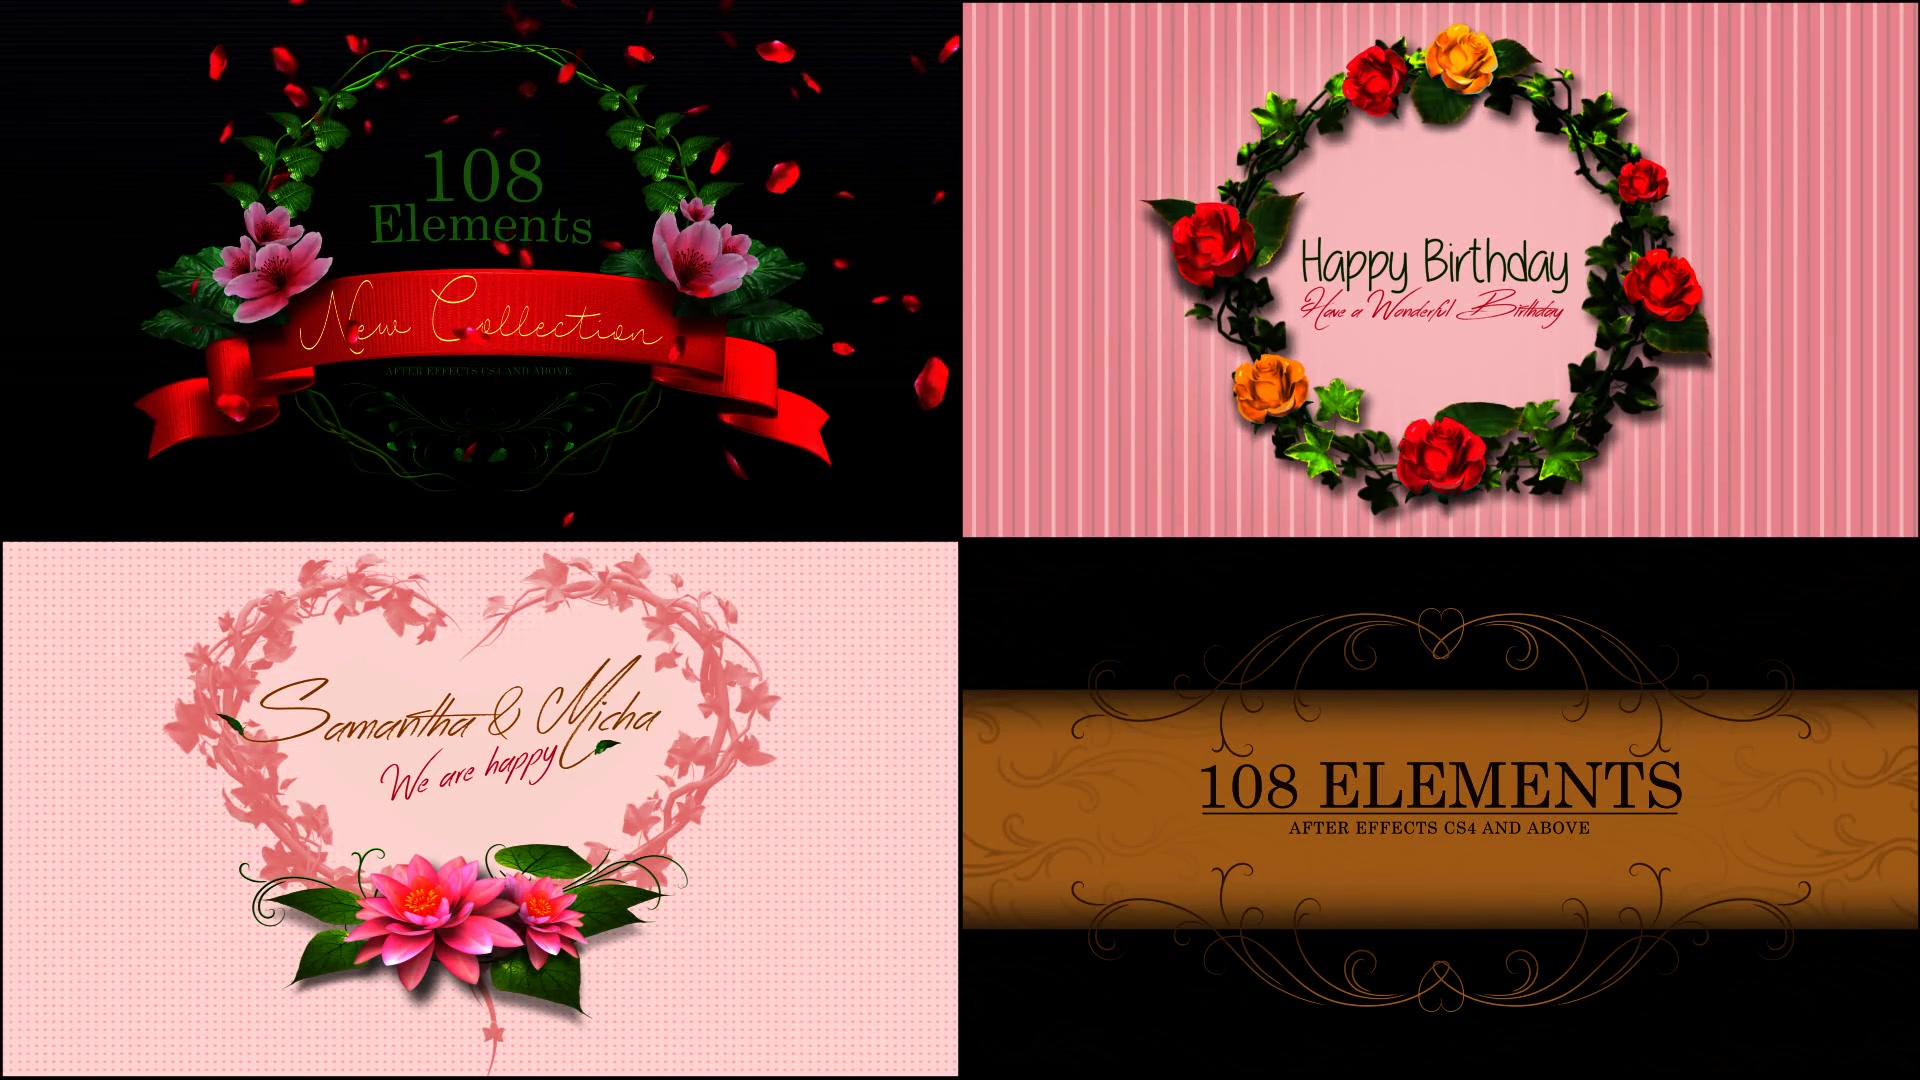 108 Flower Elements - Download Videohive 14656996